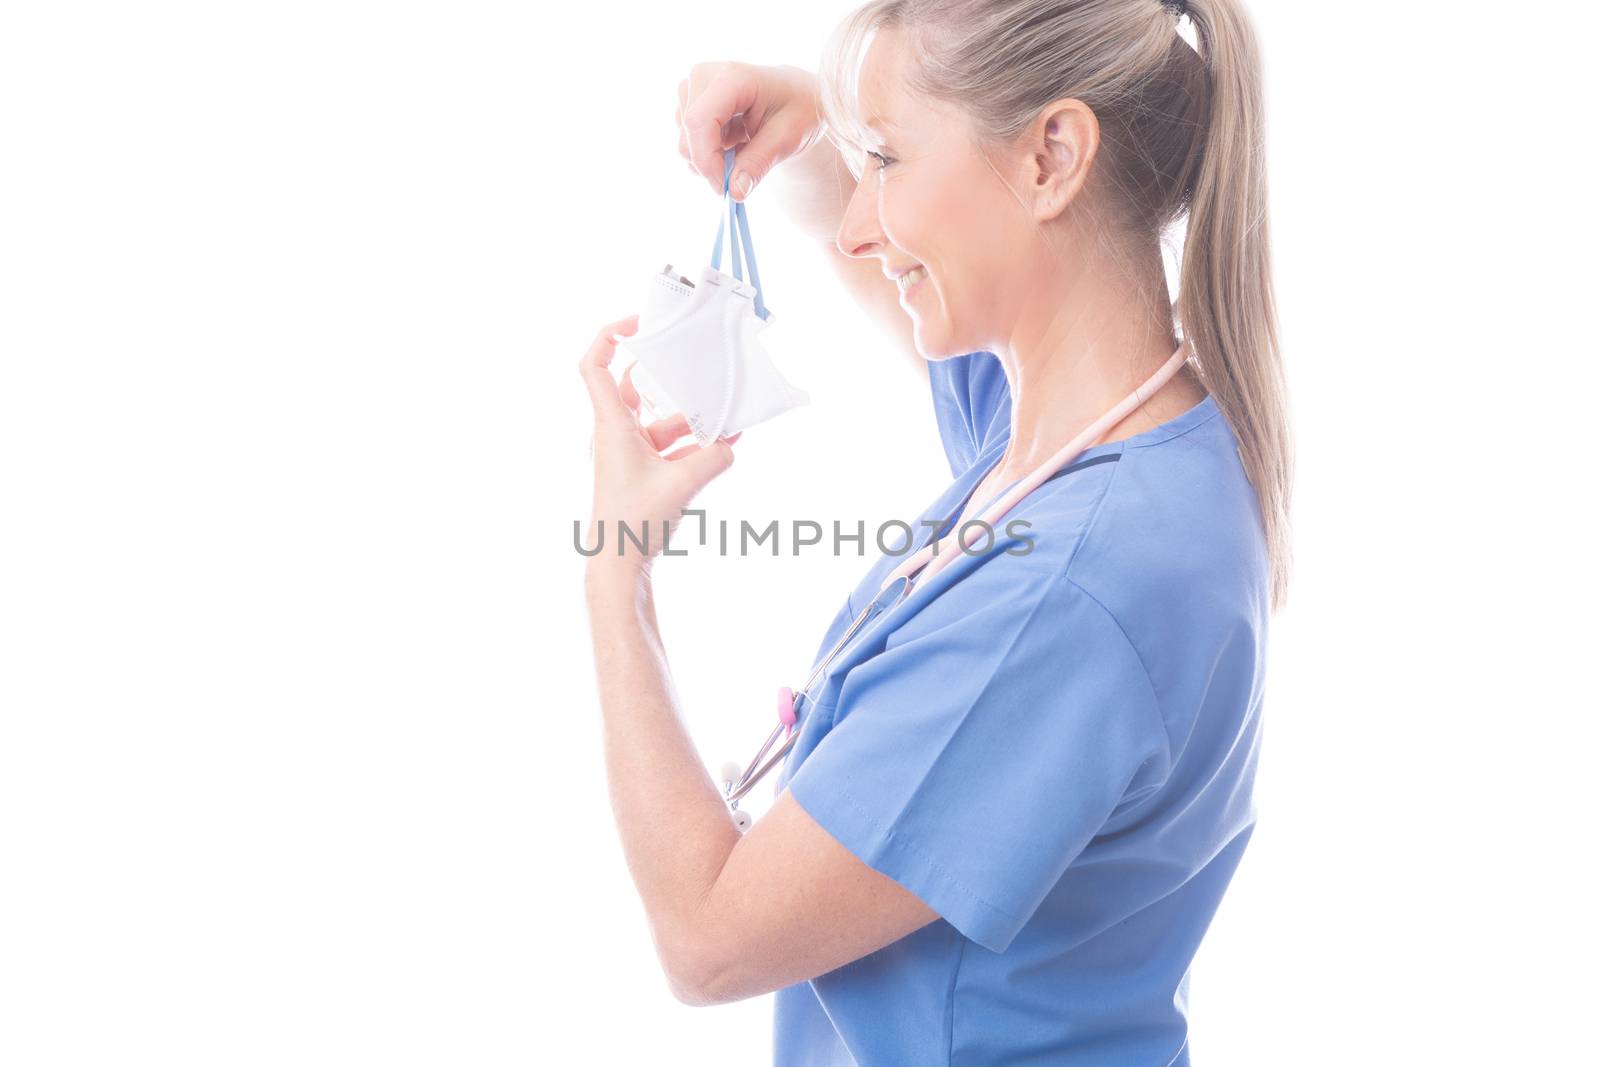 Doctor, nurse or other healthcare worker putting on a respirator N95 face mask.  She is wearing blue scrubs and a stethoscope hangs around her neck. COVID-19 coronavirus or influenza pandemic or other infectios disease